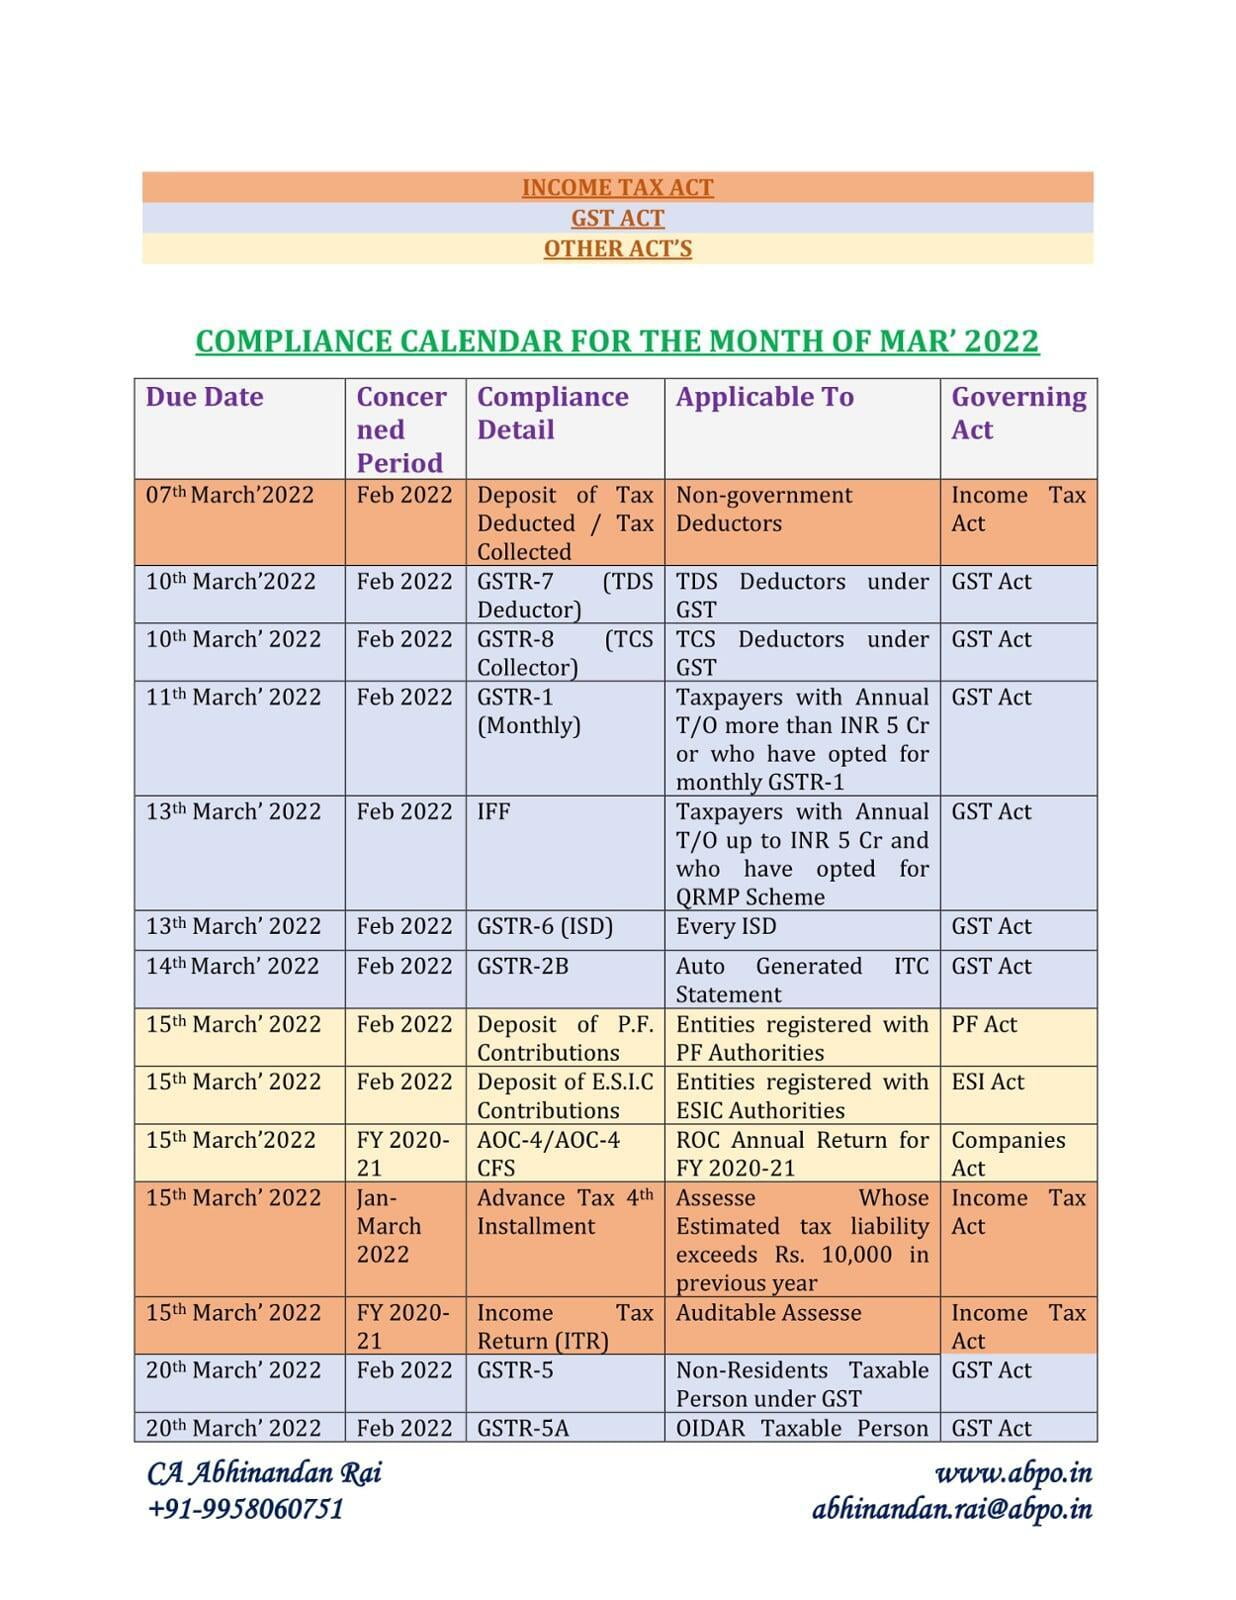 COMPLIANCE or DUE DATE CALENDAR FOR THE MONTH OF MARCH 2022